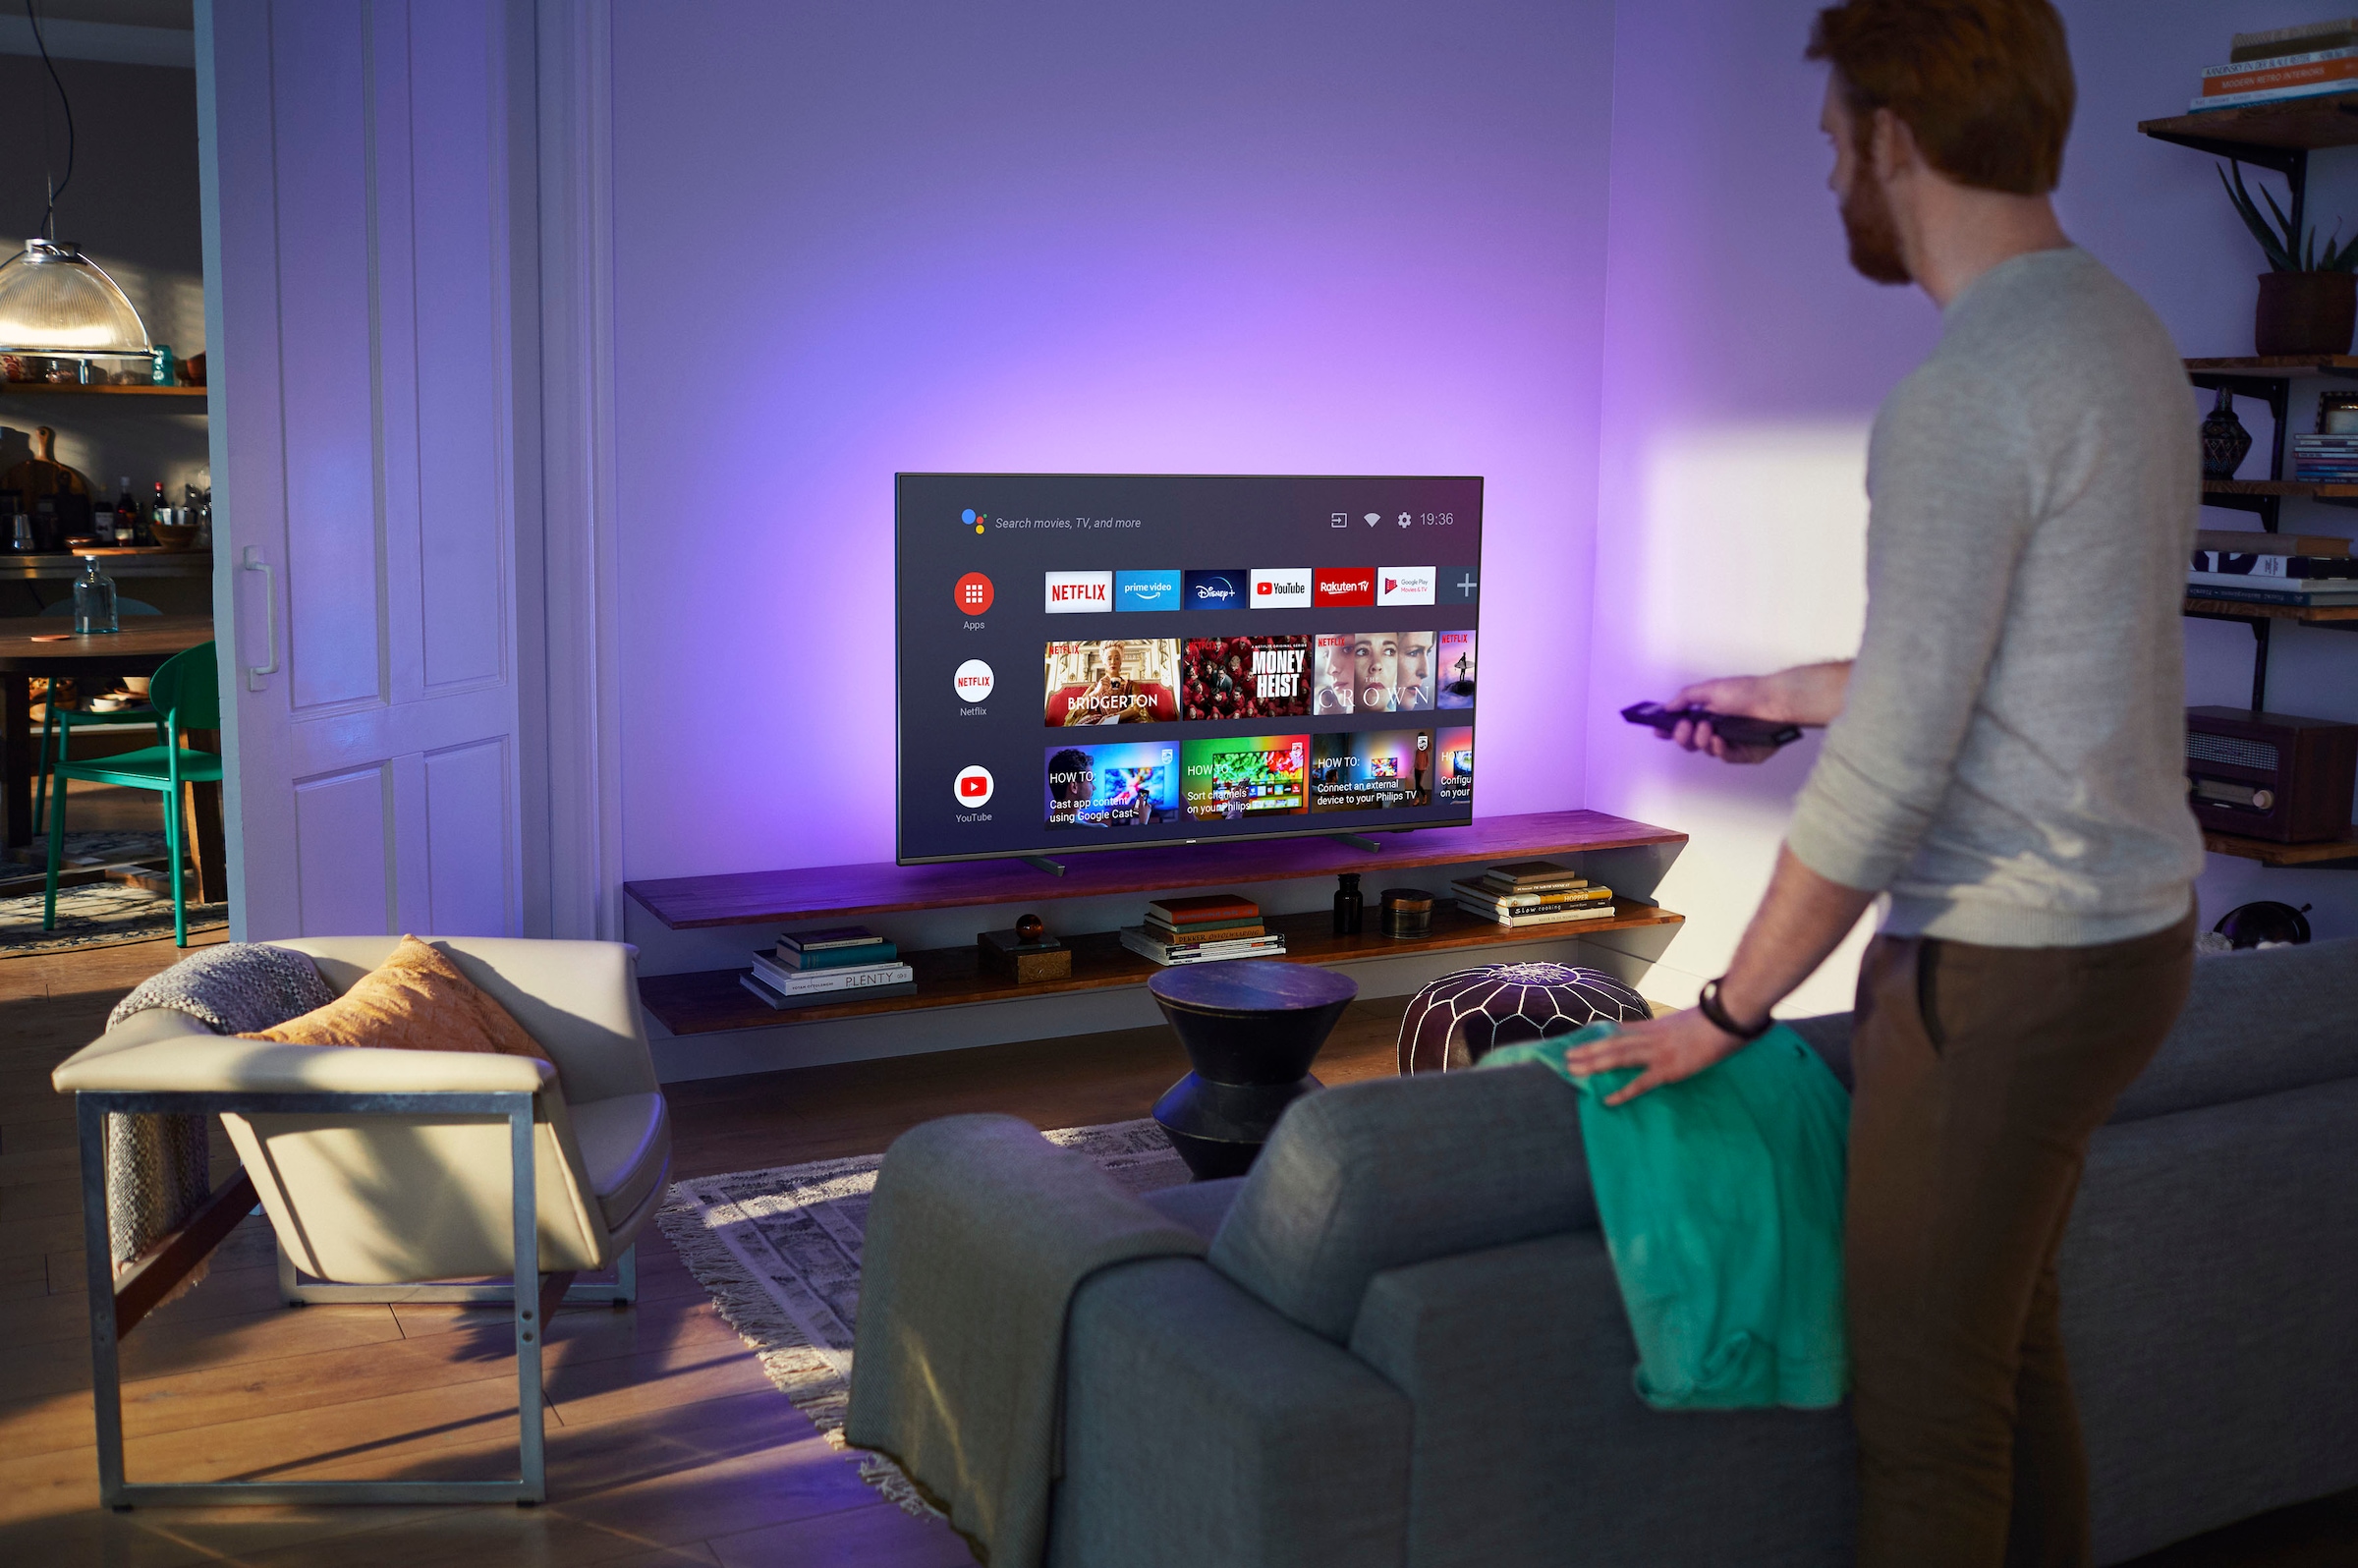 Philips LED-Fernseher, 126 cm/50 Zoll, 4K Ultra HD, Android TV-Smart-TV, 3-seitiges Ambilight